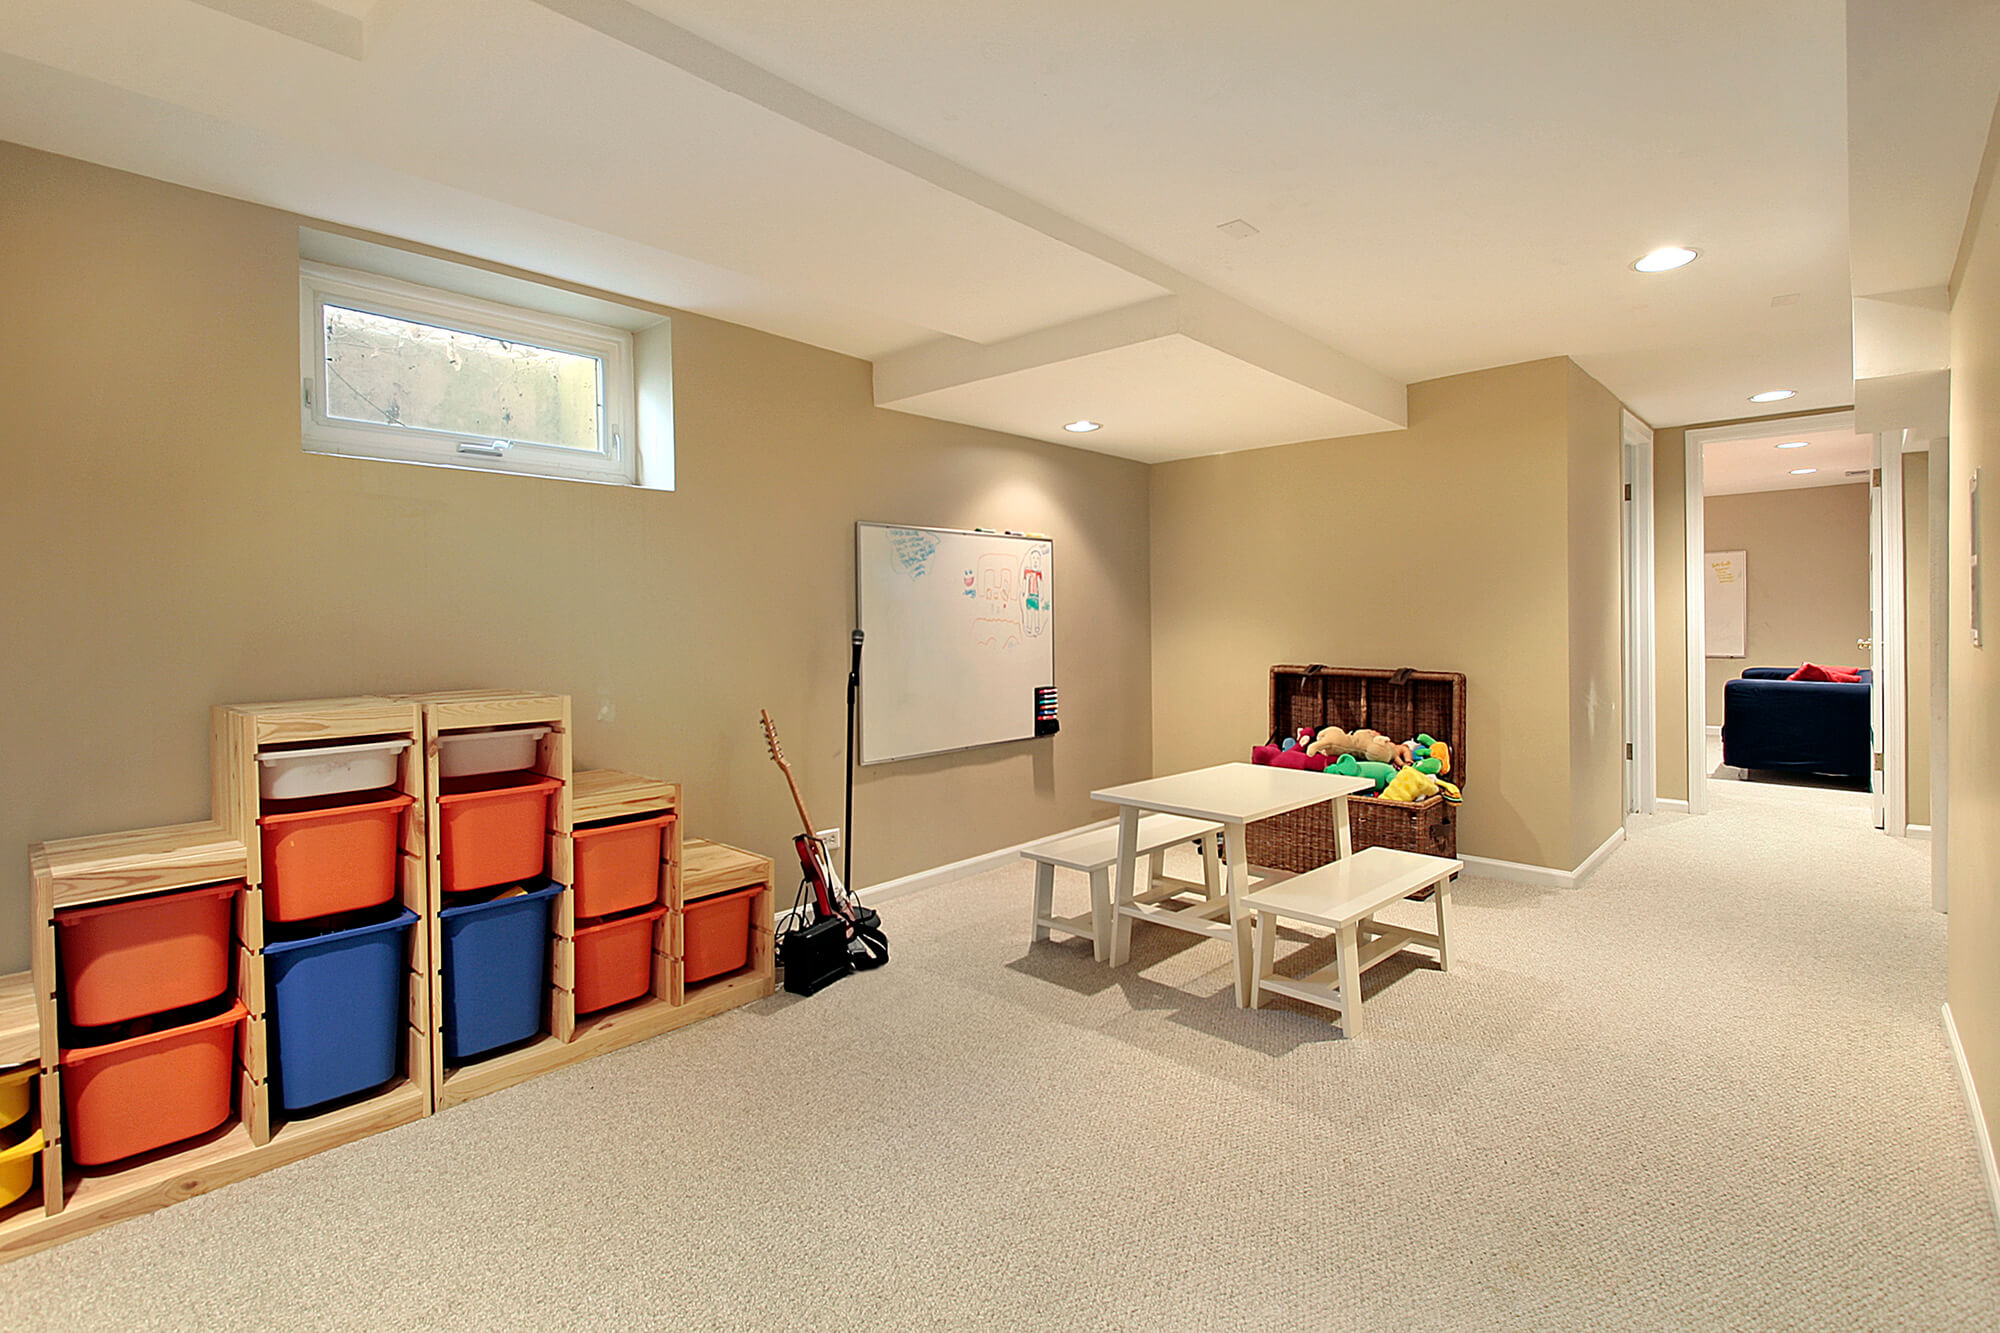 How to Organize Your Basement in 7 Genius Steps